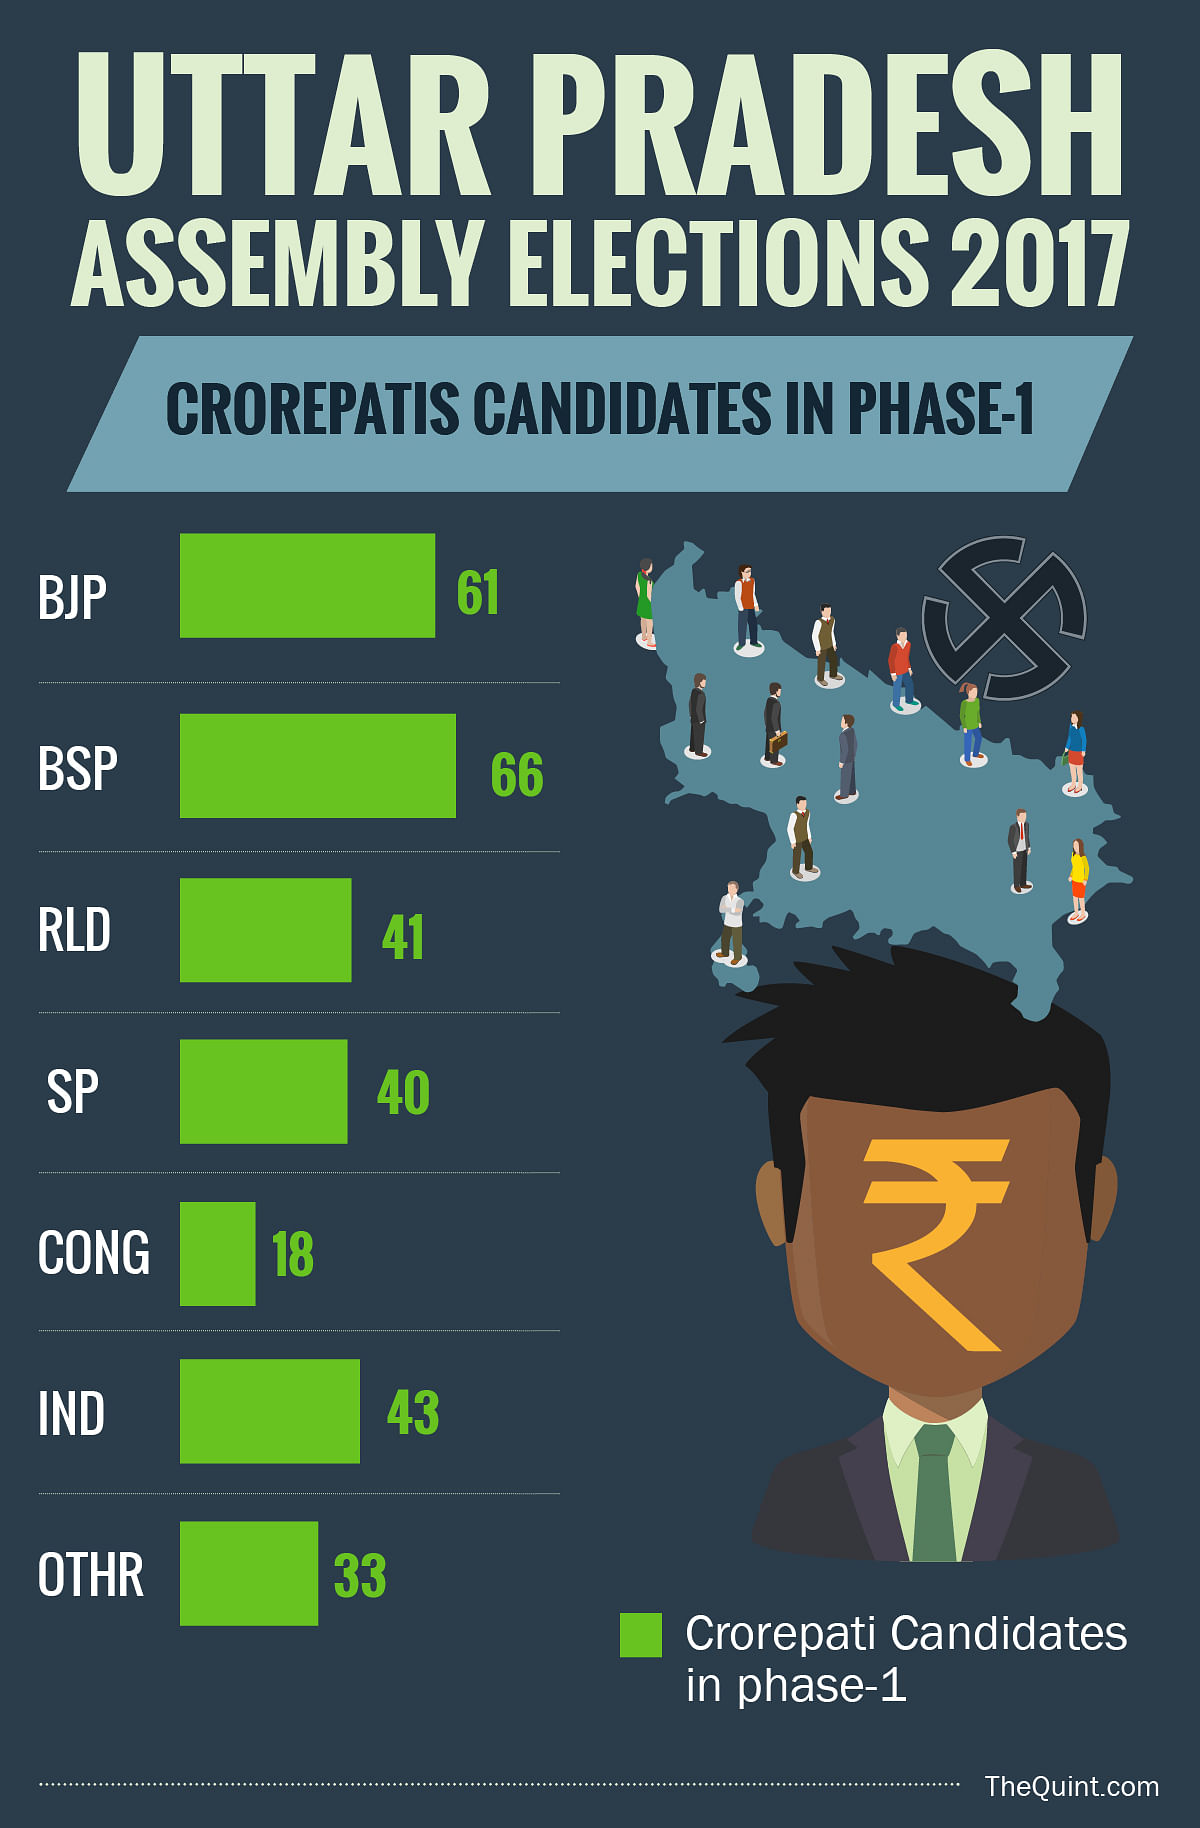 

Here are some interesting facts about the first phase of the polls.